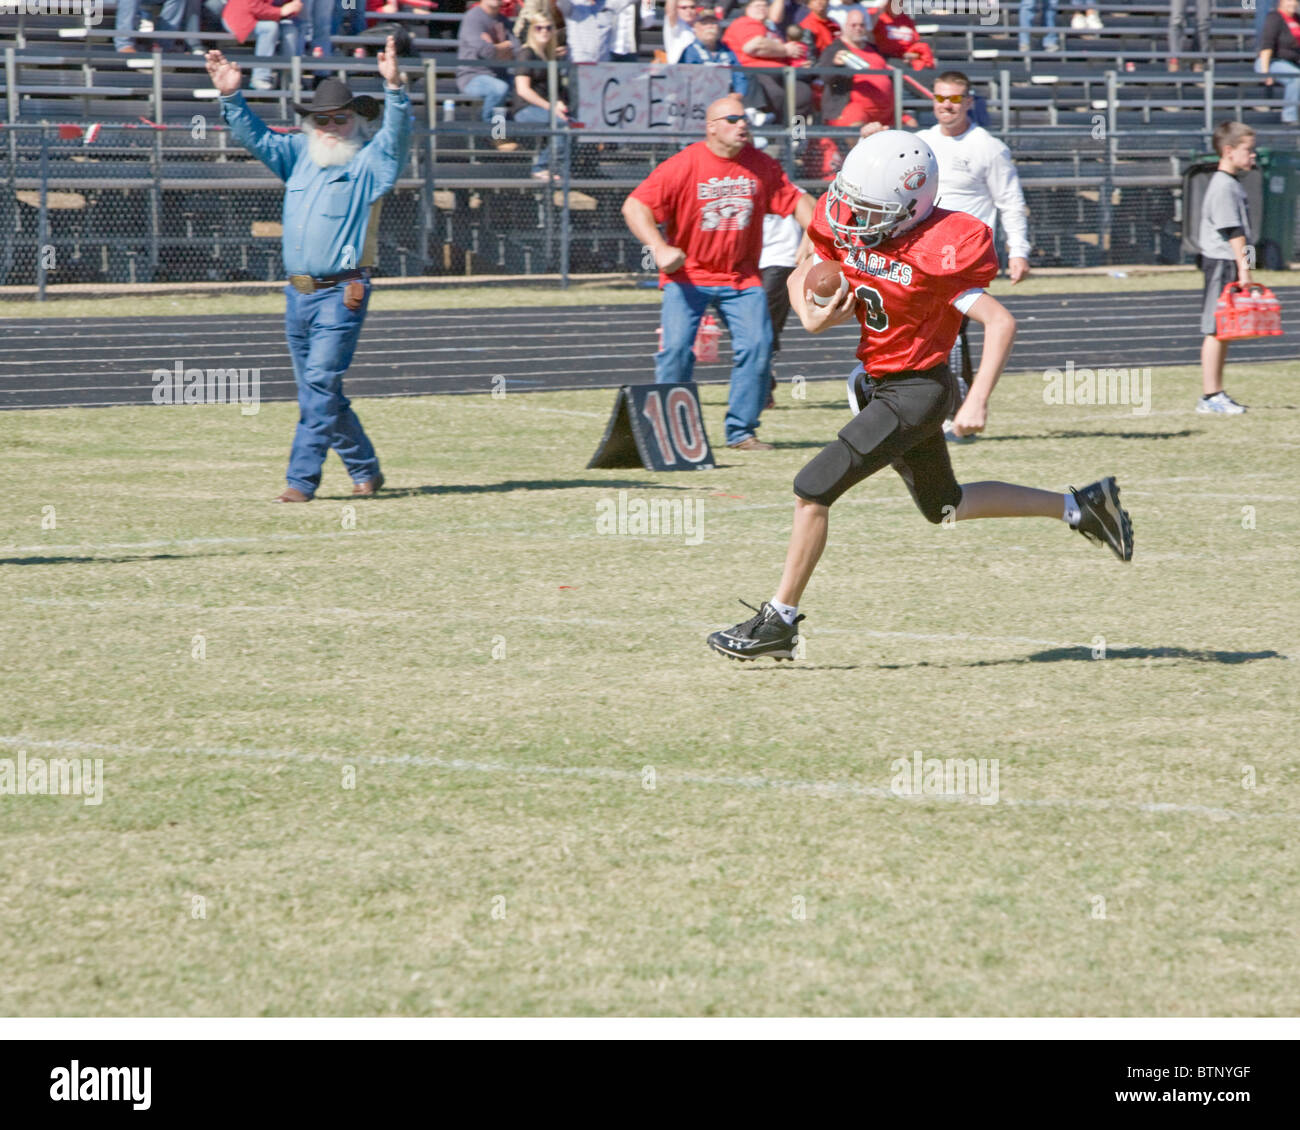 American Youth football player scoring touchdown Stock Photo